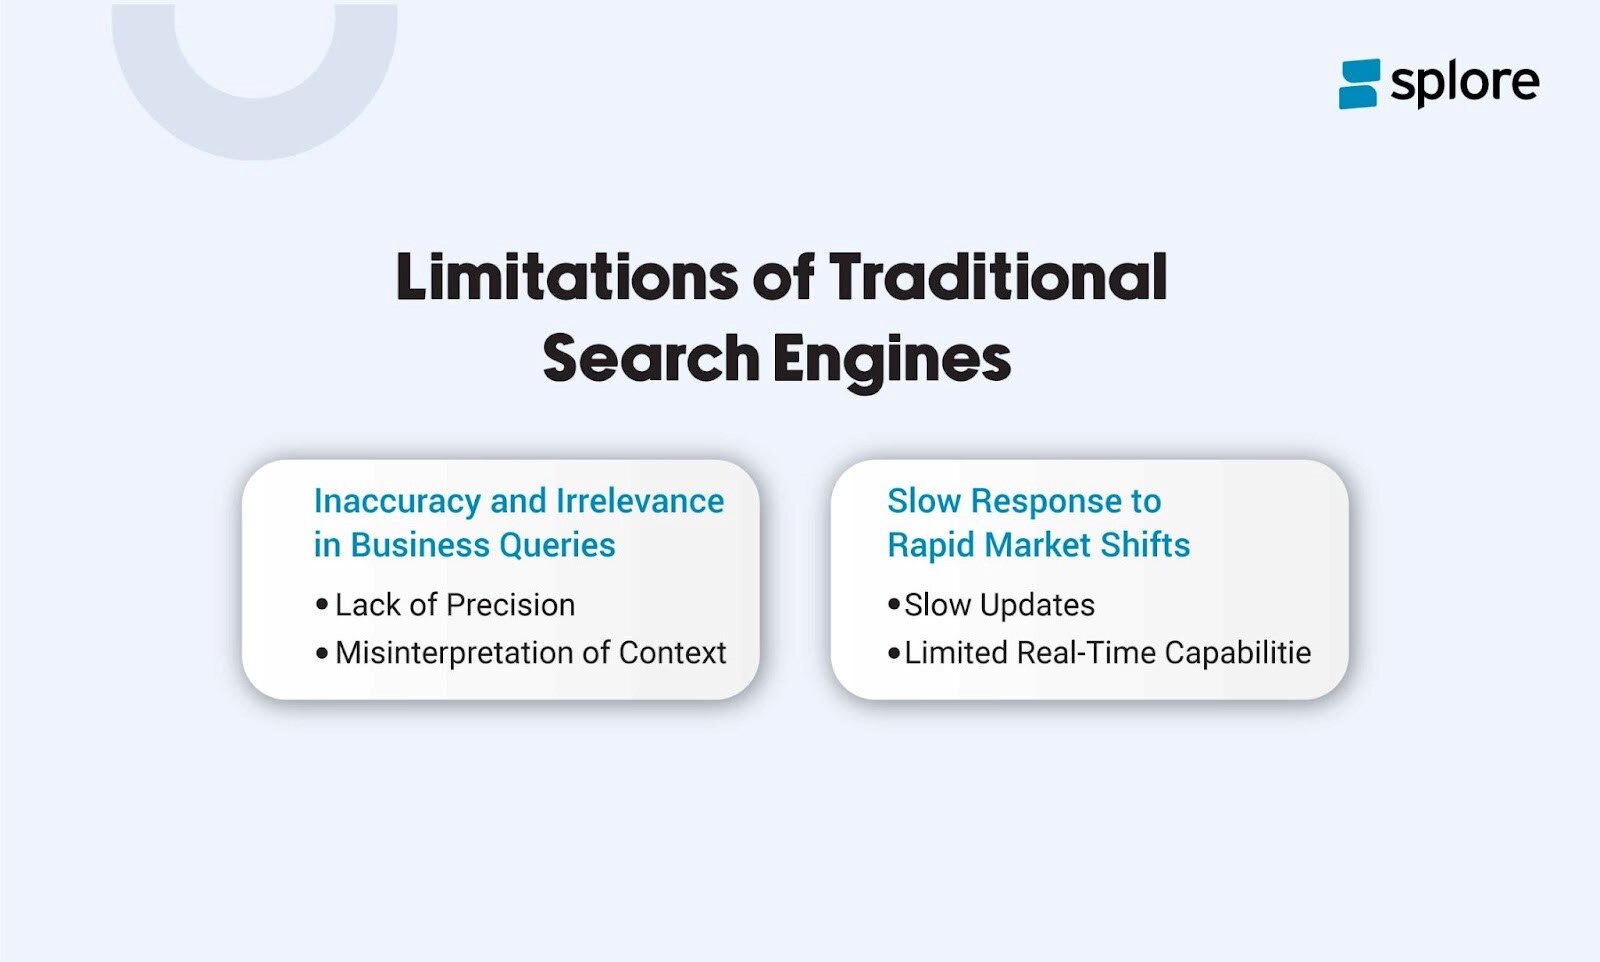 Limitations of Traditional Search Engines